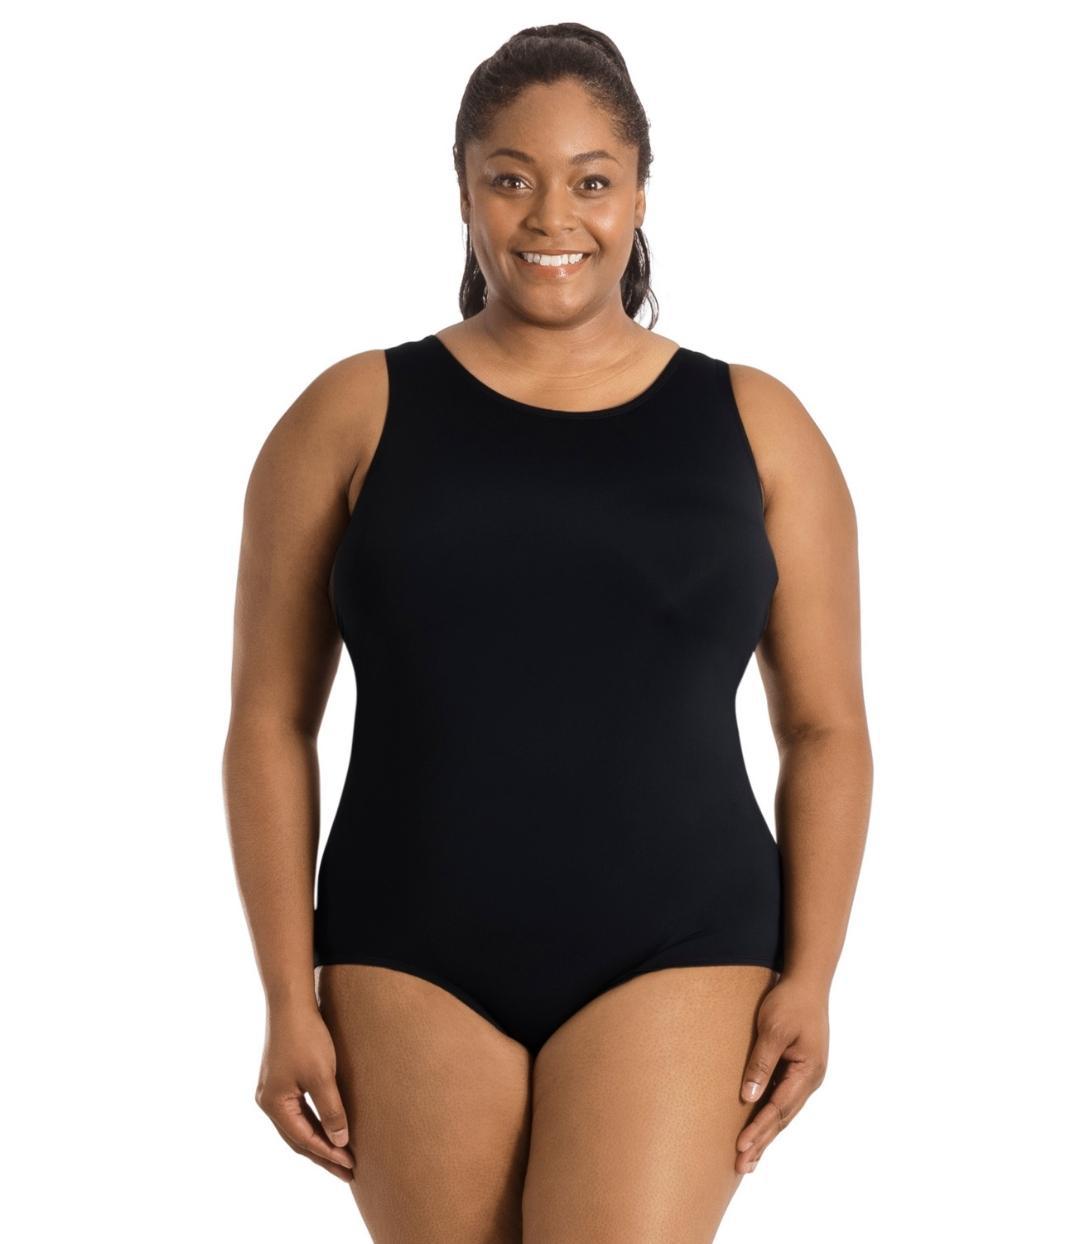 Plus size woman, facing front, wearing JunoActive plus size QuikEnergy Spa Suit Black. The suit is solid black, has a scoop neckline and conservative leg opening.